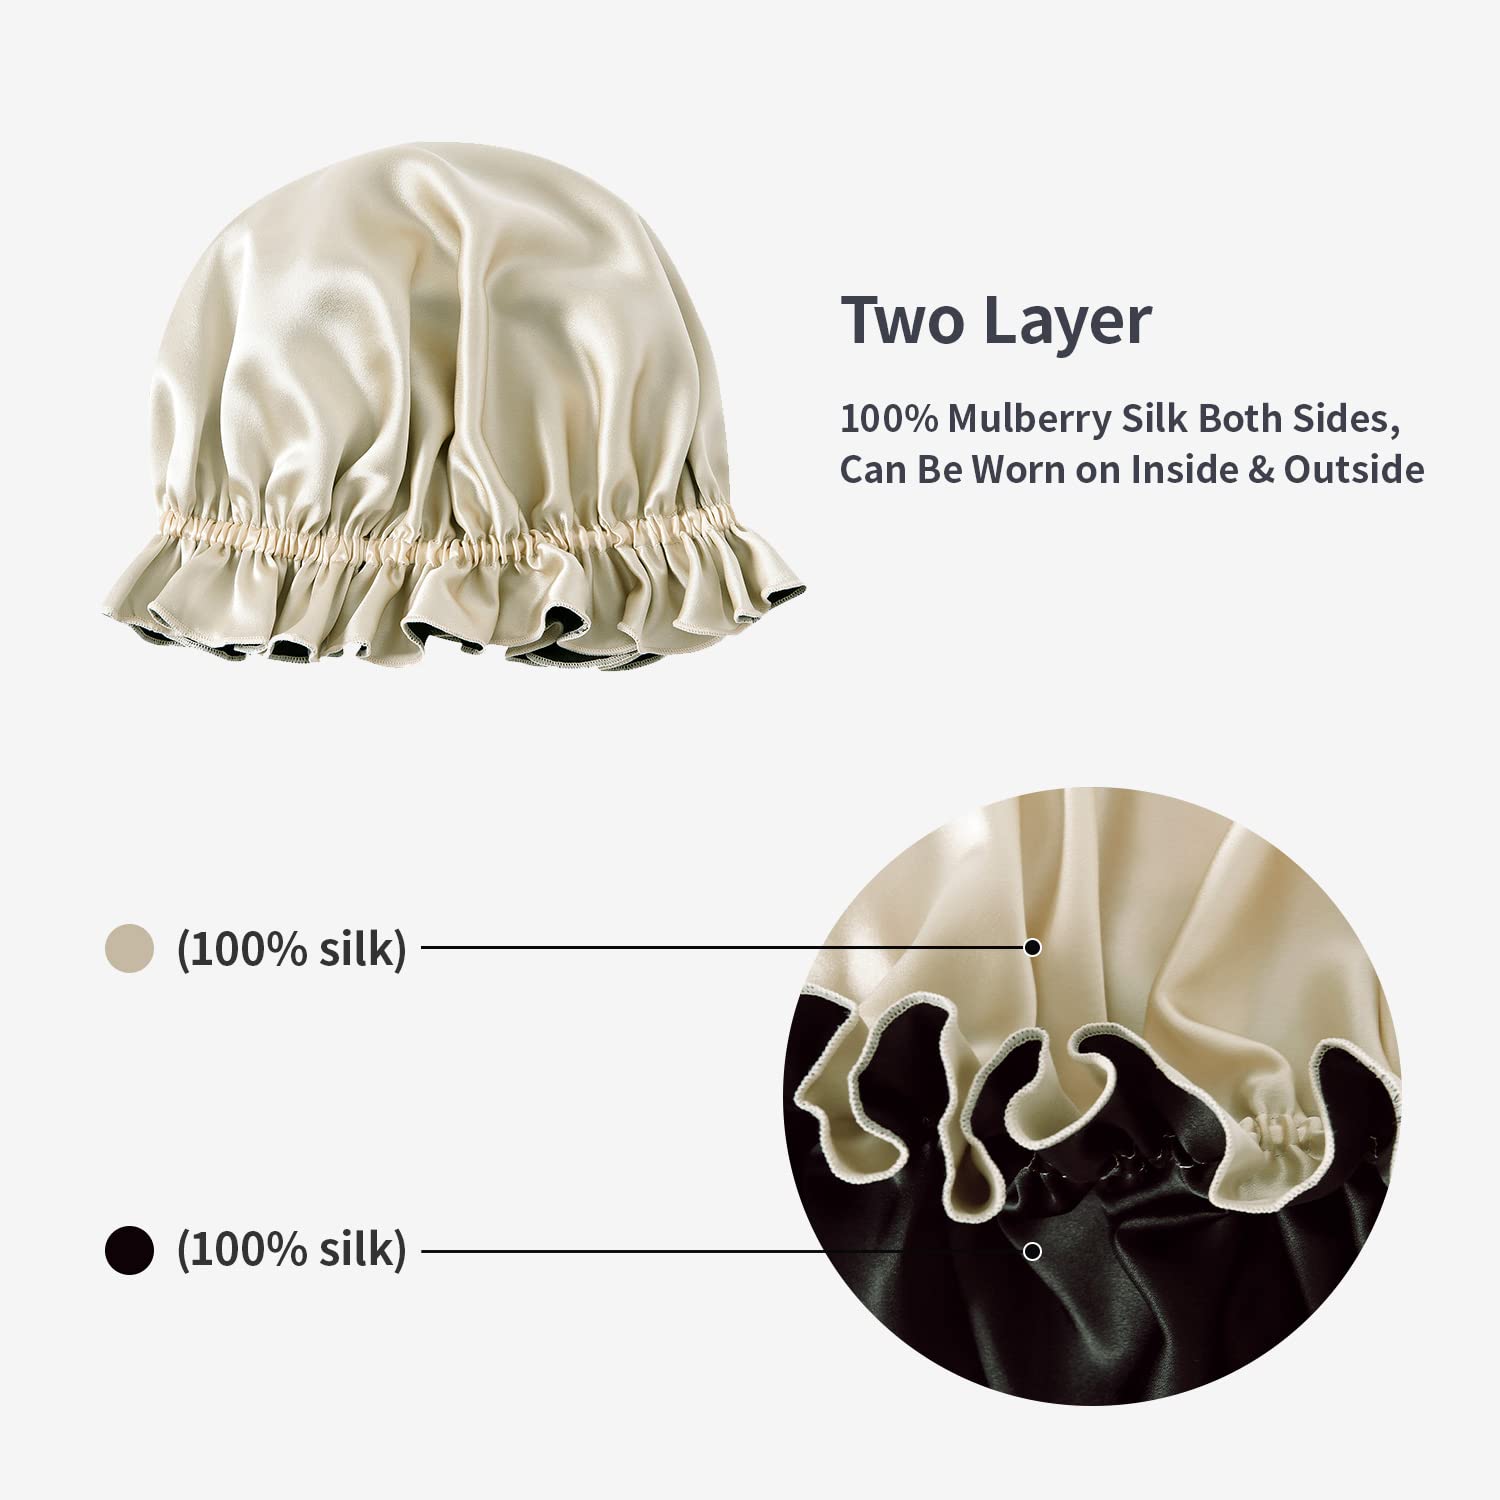 ZIMASILK 100% Mulberry Silk Bonnet for Women Hair Care, Double Layered, Silk Hair Wrap for sleeping with Elastic Stay On Head (1Pc, Taupe+Black)